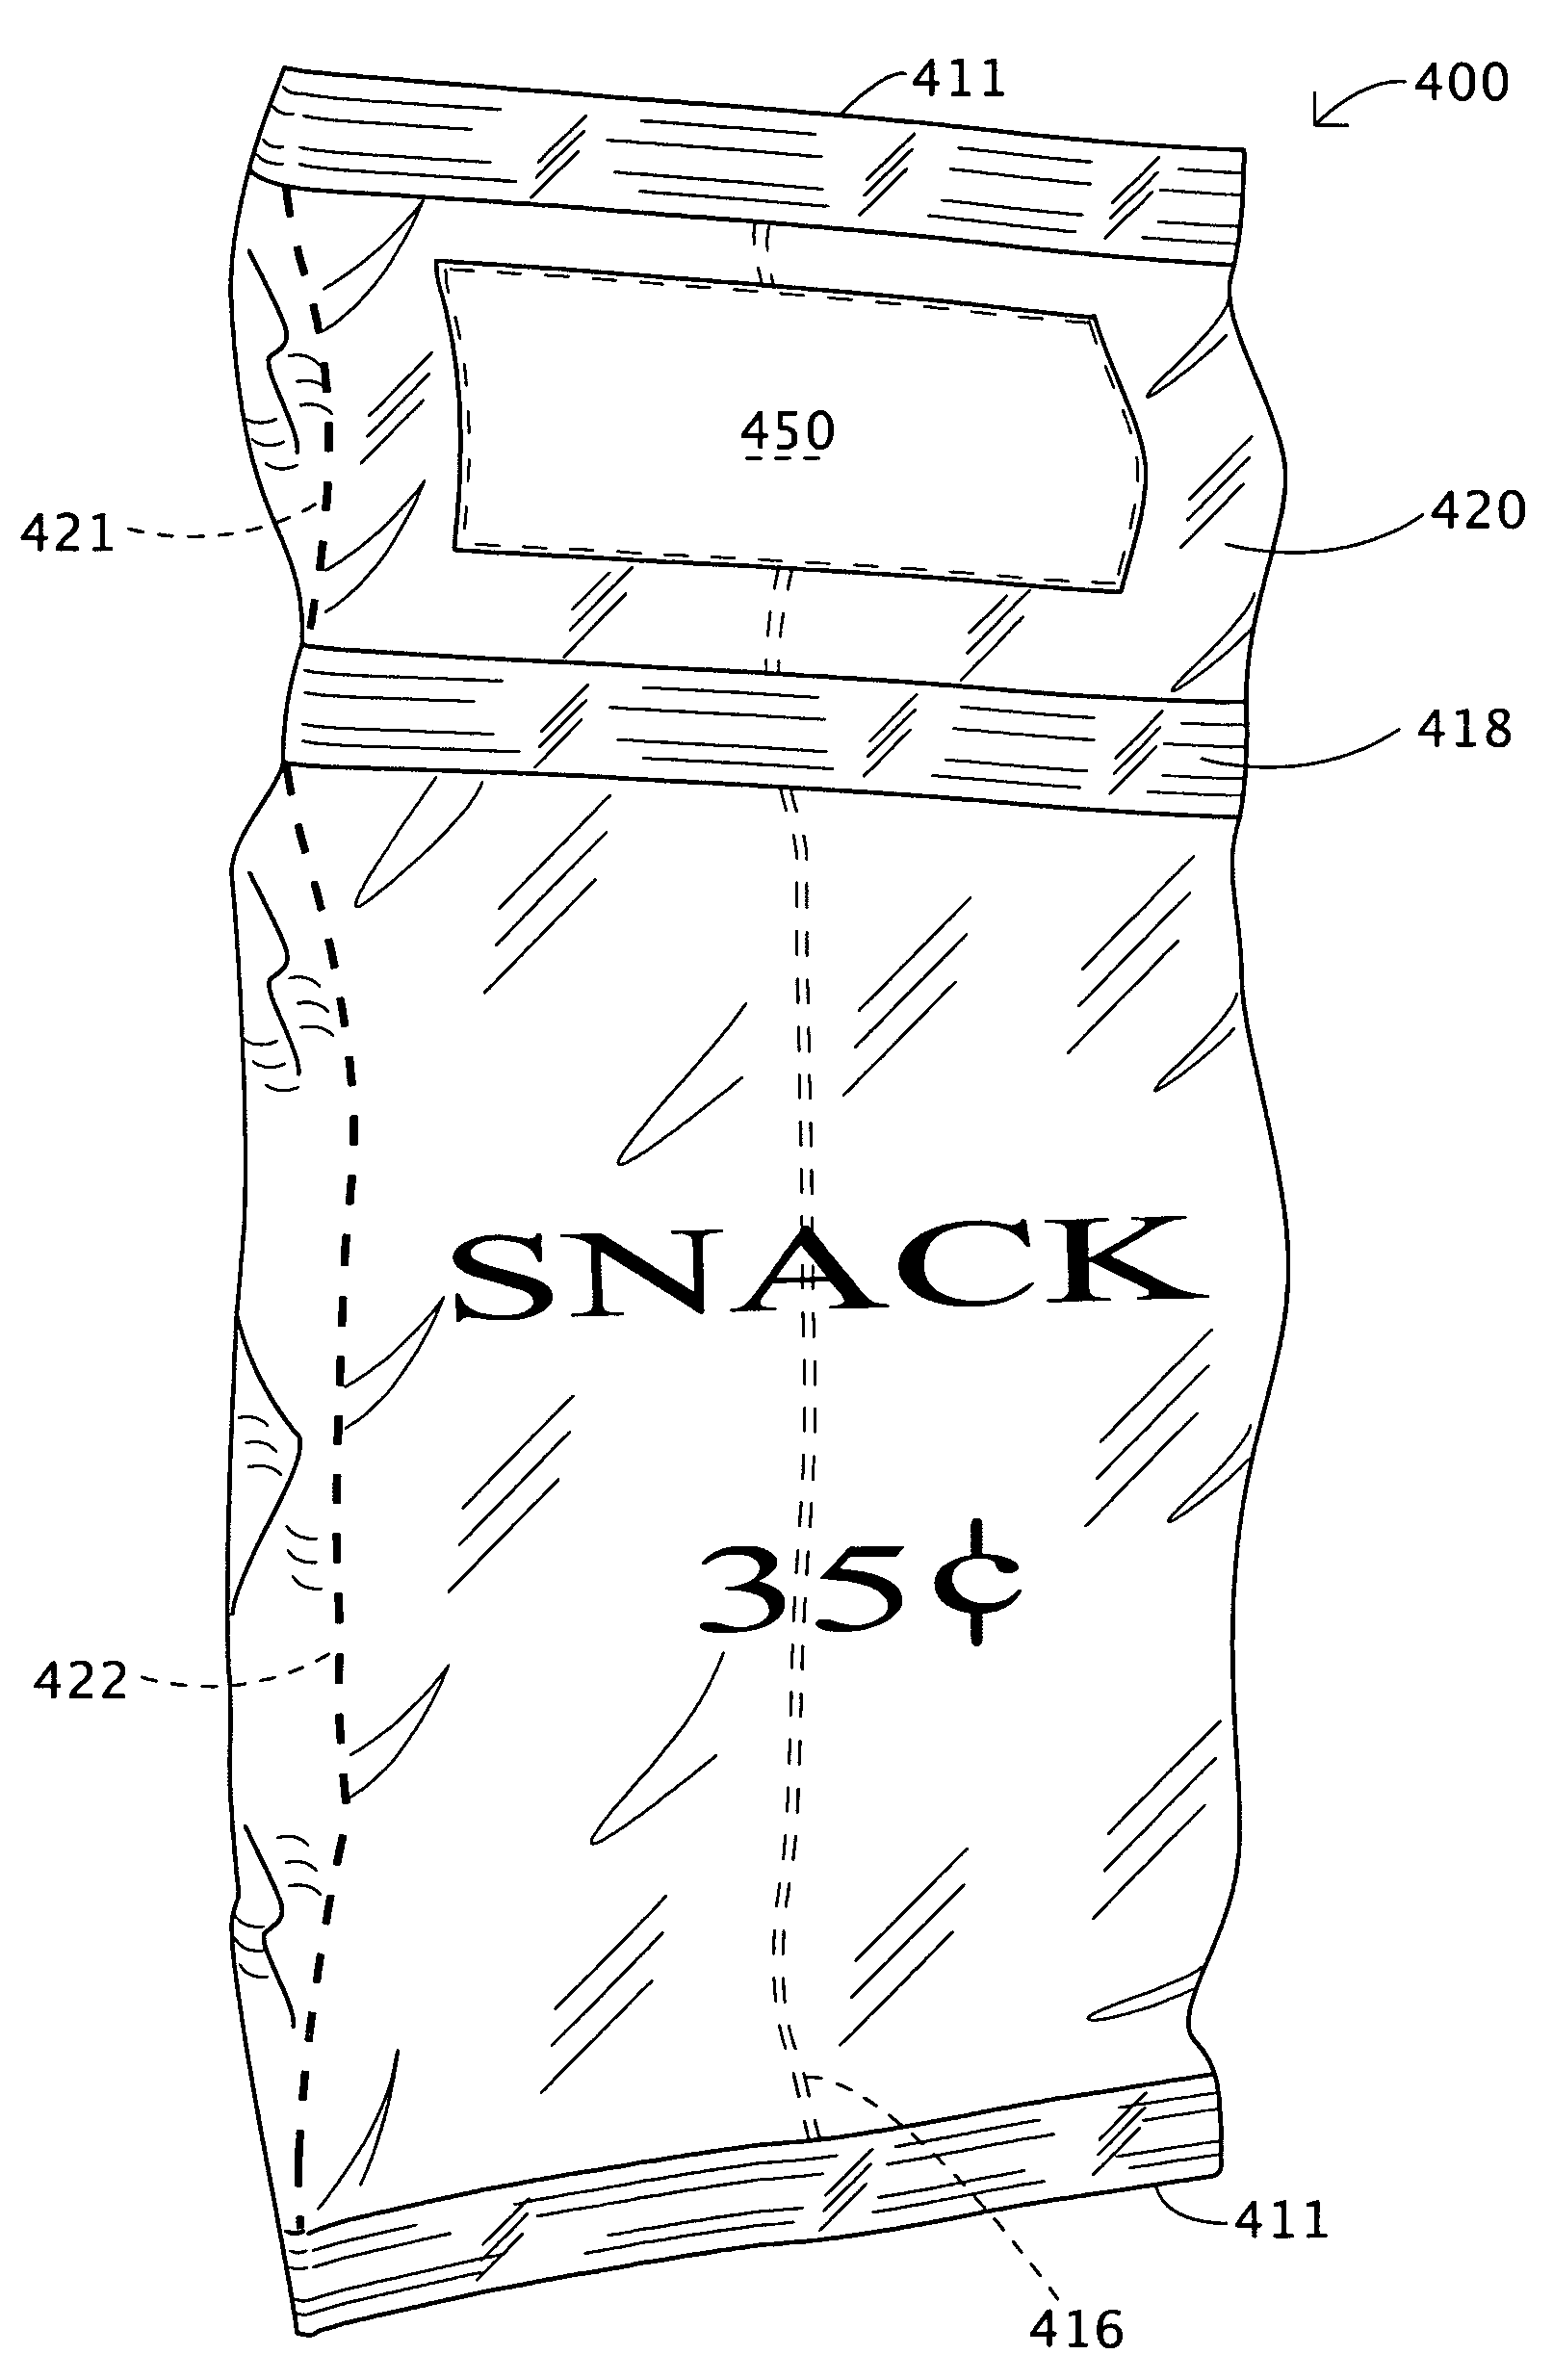 Flexible composite snack package